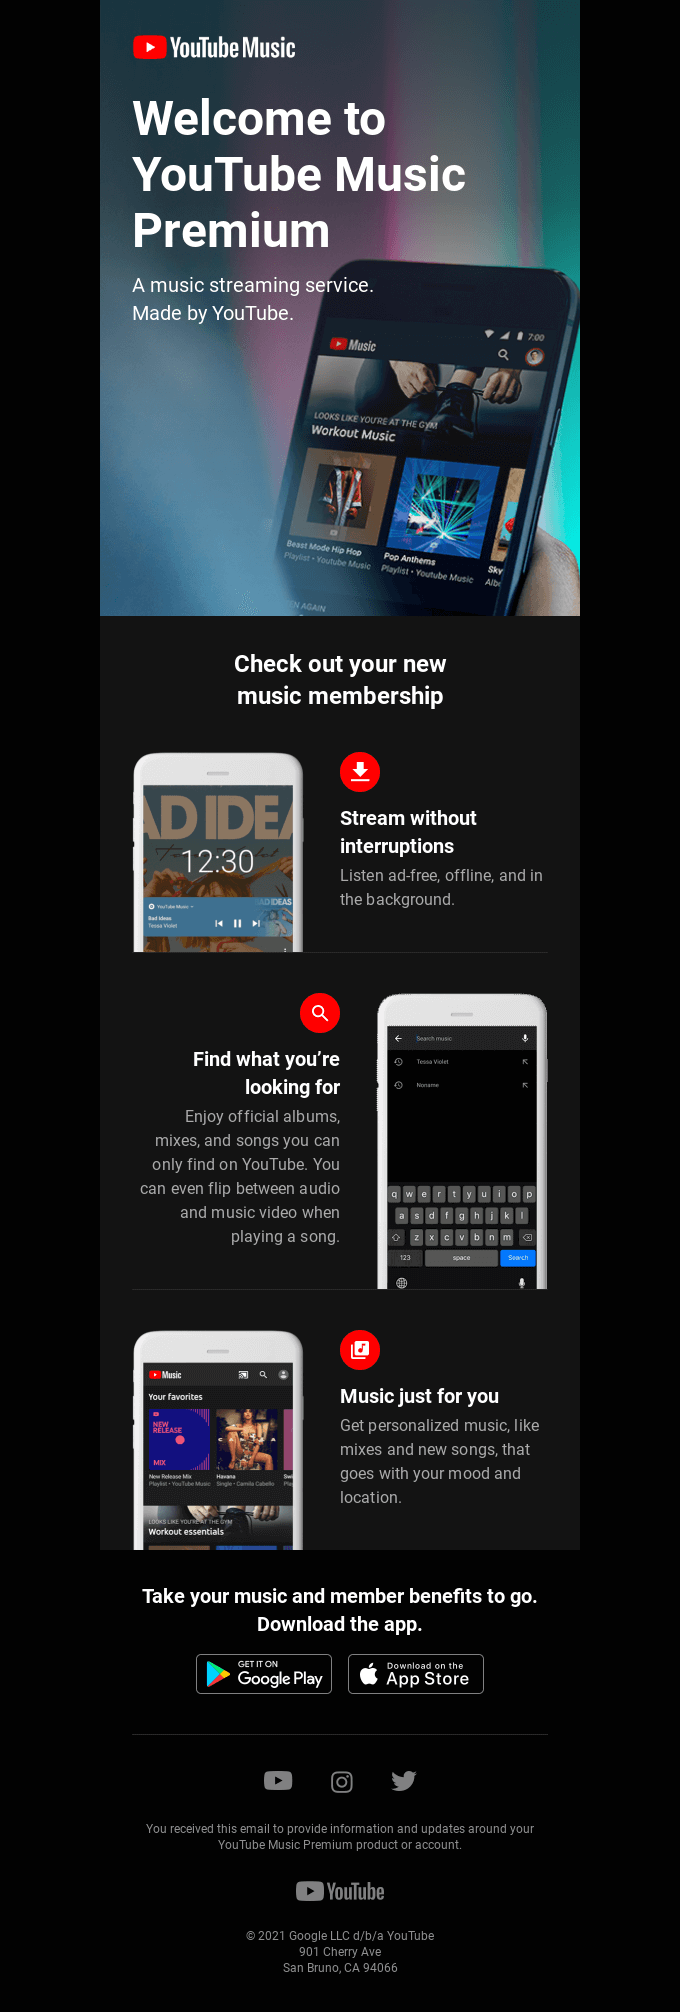 You’re now a YouTube Music Premium member